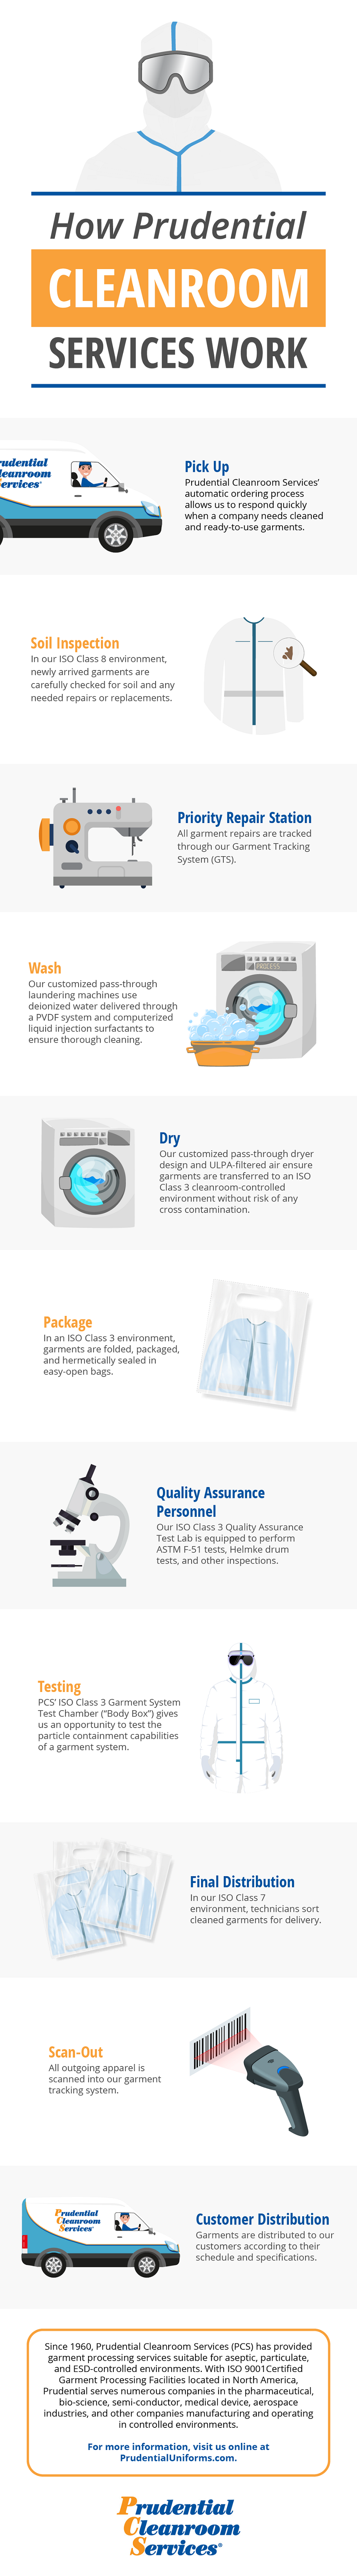 Prudential Cleanroom Services Program Works Infographic